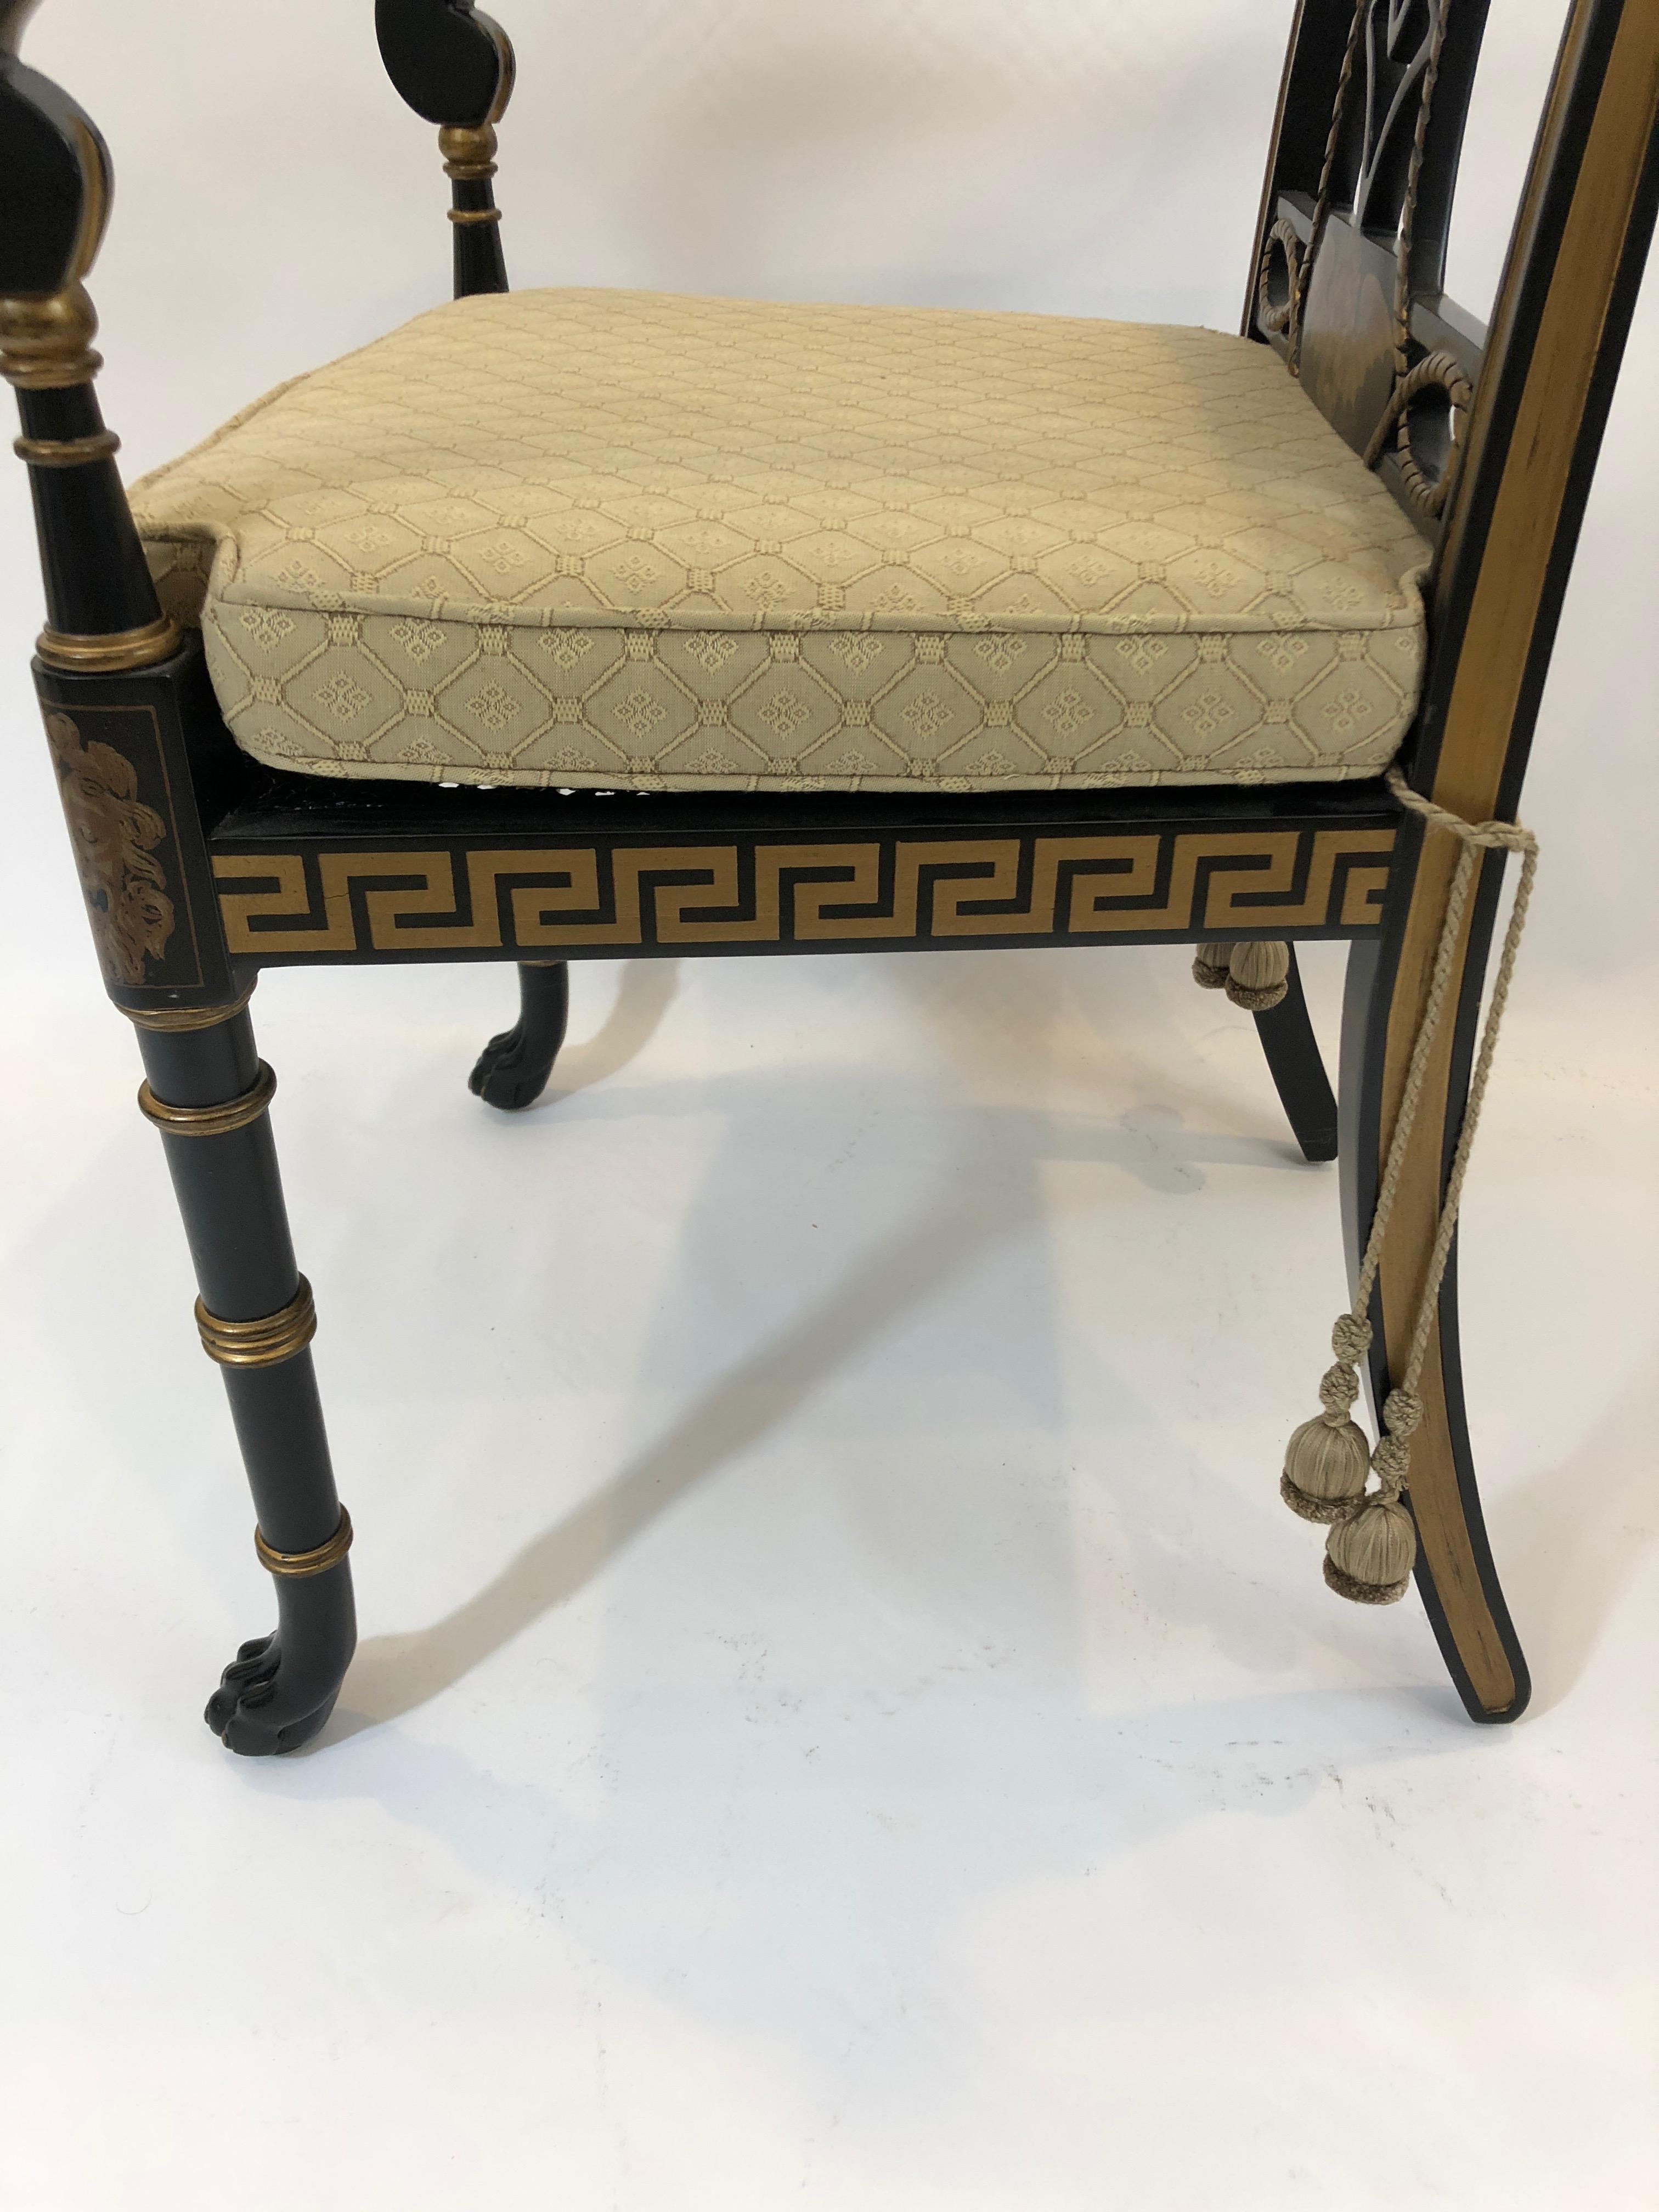 Late 20th Century Sensational Greek Key Motif Regency Style Arm Chair Club Chair with Caned Seat